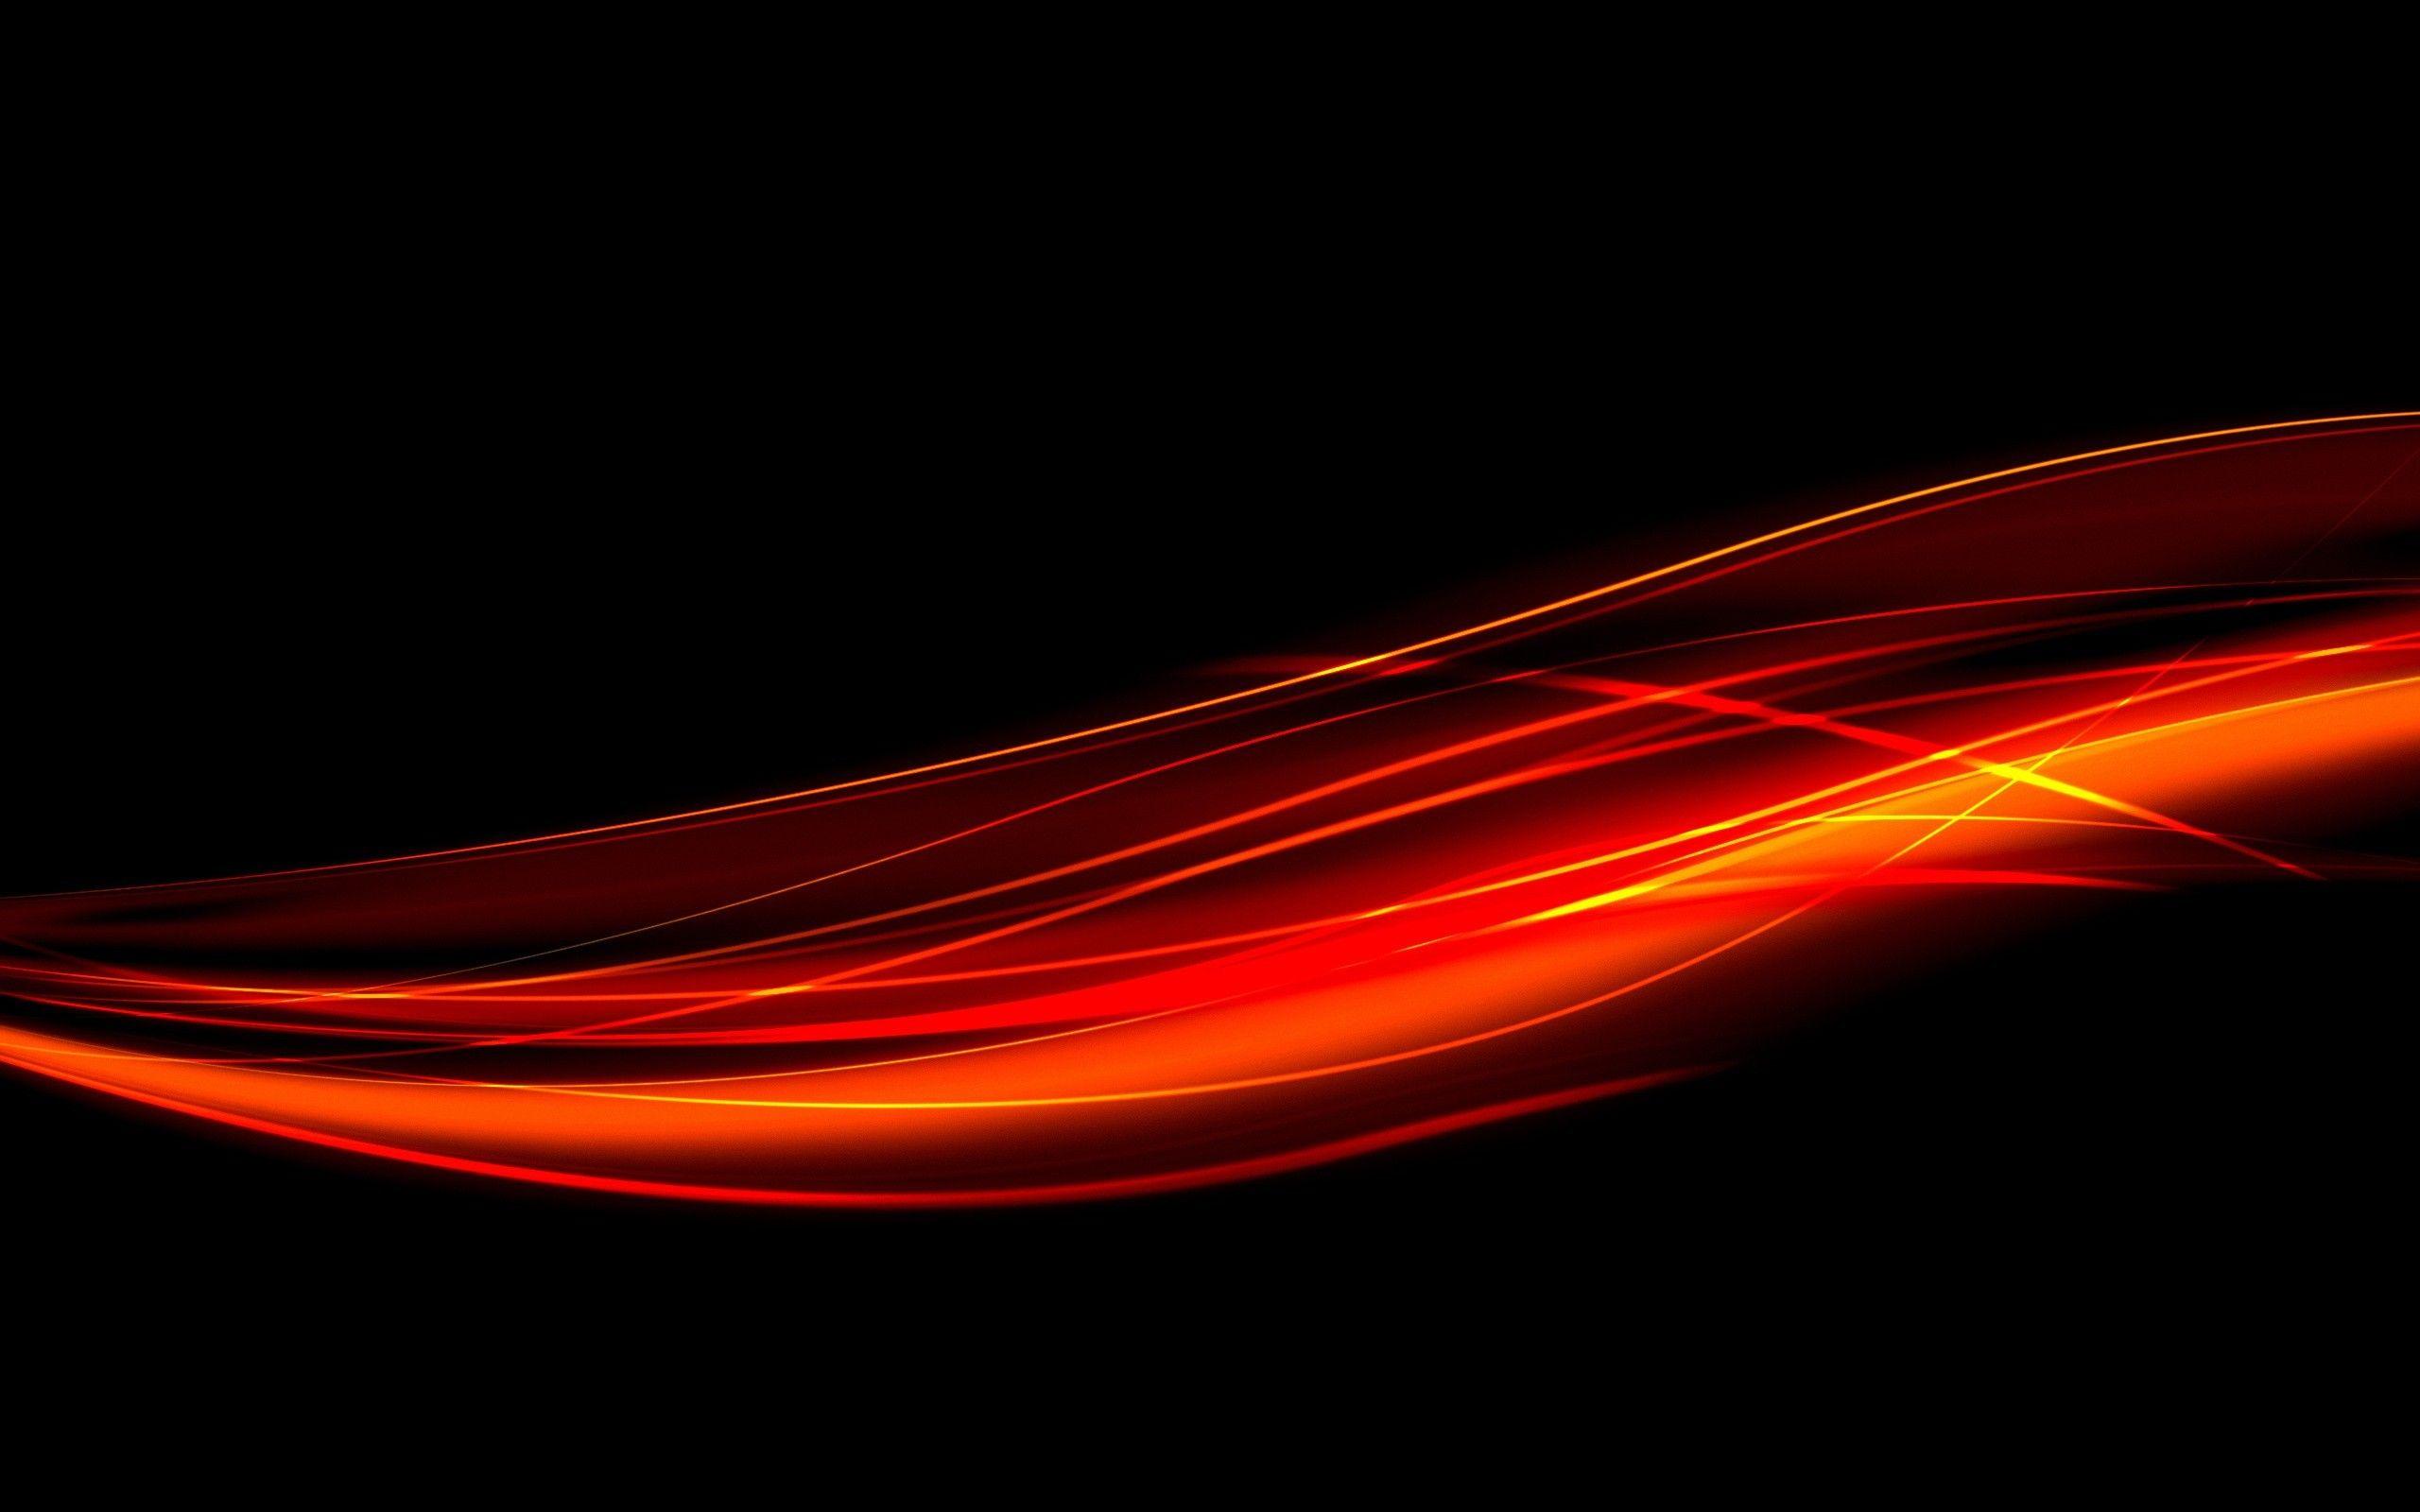 Black and Orange Abstract Wallpapers - Top Free Black and Orange